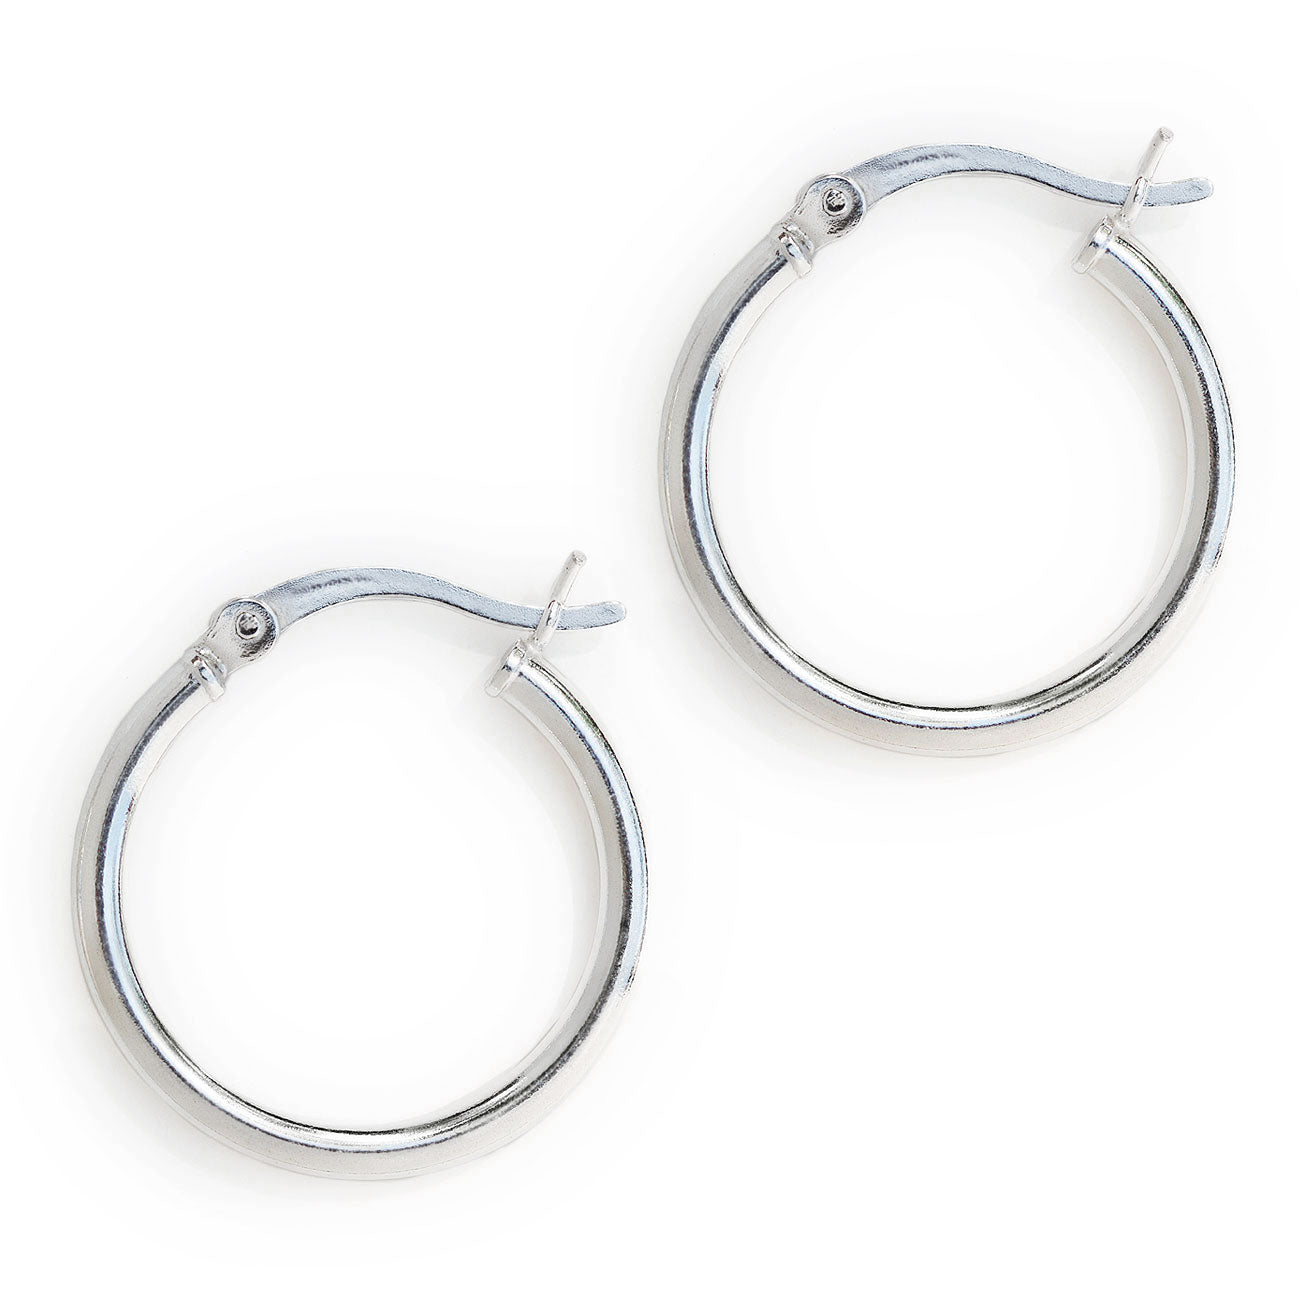 Indian Traditional cultural trendy style 925 sterling silver plain shiny hoops  earring, amazing unisex light weight hoops earrings s1149 | TRIBAL ORNAMENTS